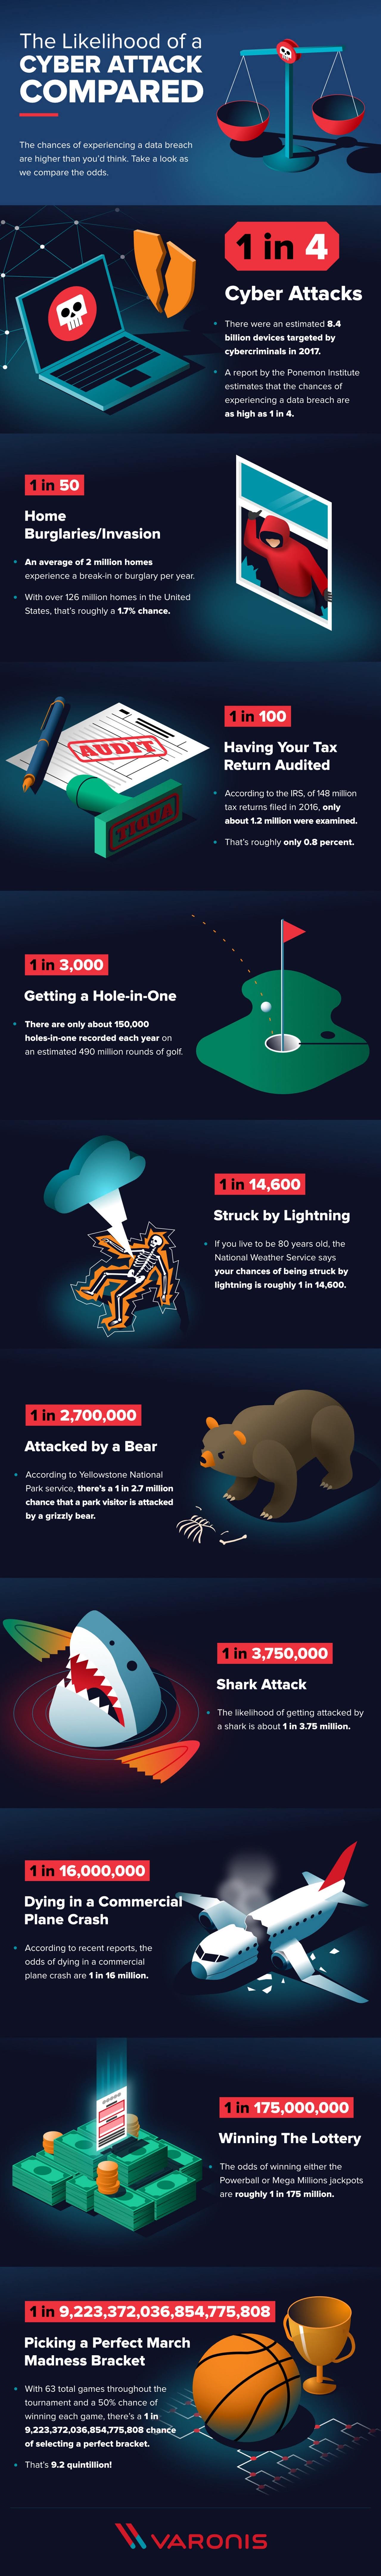 The Likelihood of a Cyber Attack Compared #infographic